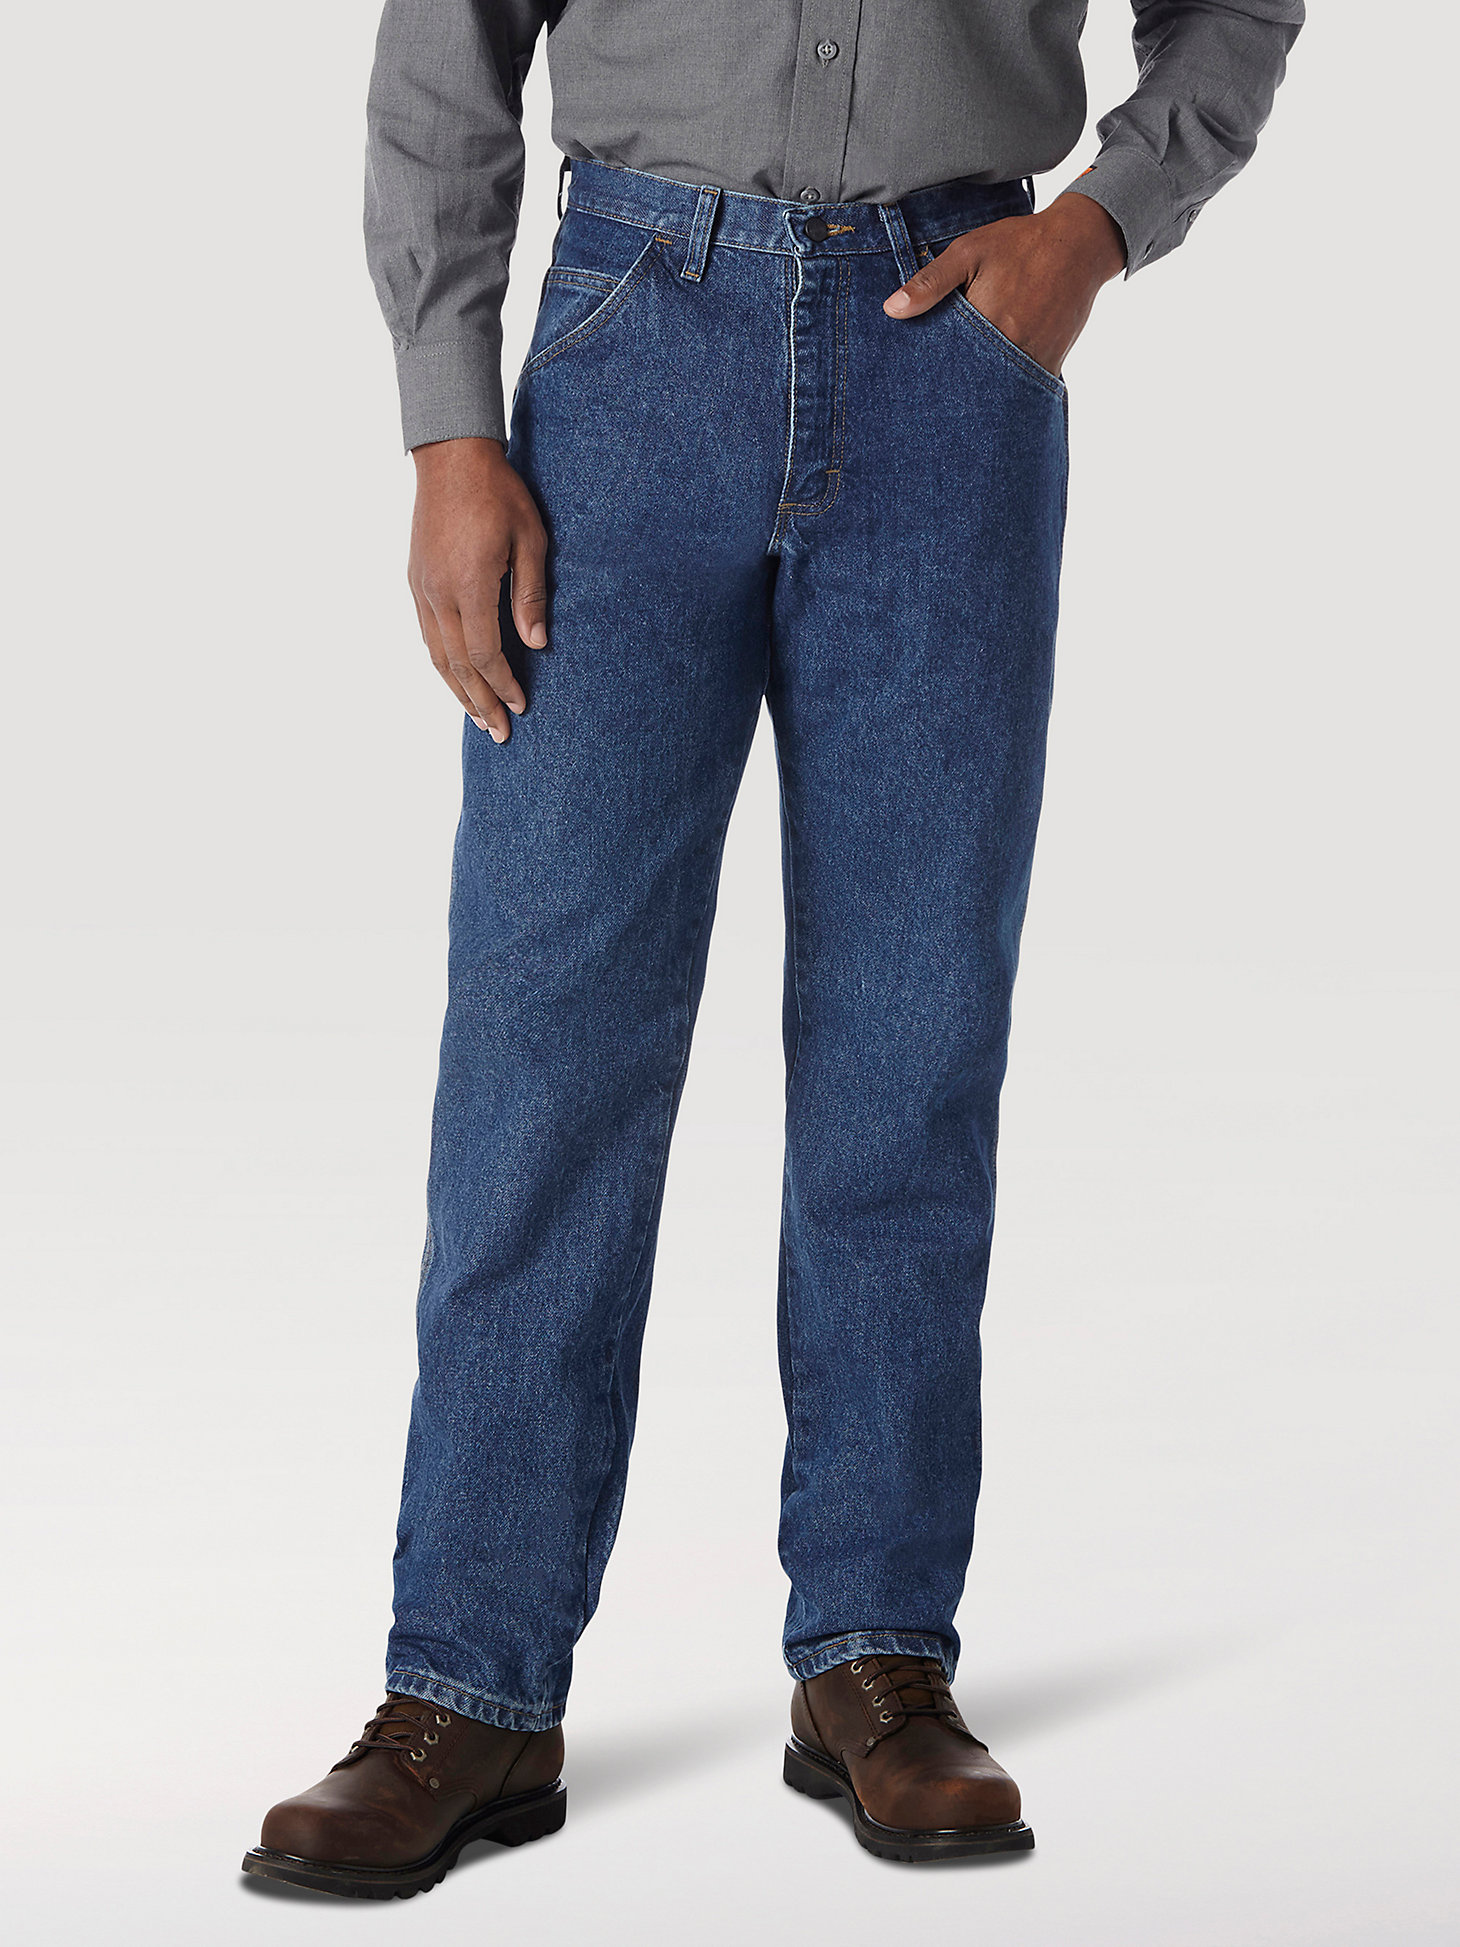 Wrangler® RIGGS Workwear® FR Flame Resistant Relaxed Fit Jean in FLAME RESISTANT main view